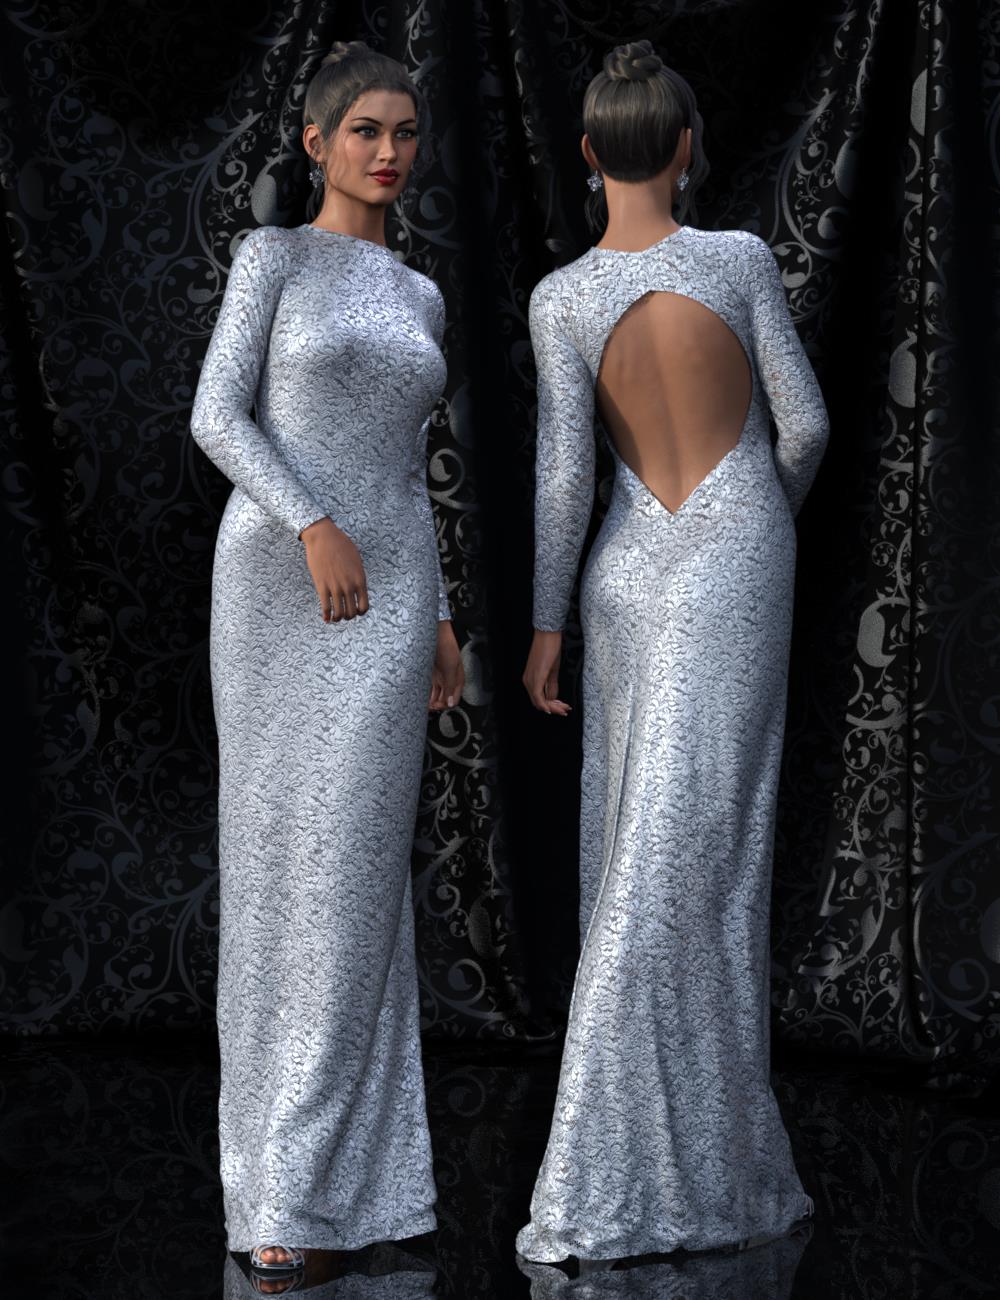 Bella Donna Poses, Chaise & Shaders by: PandyGirlElliandra, 3D Models by Daz 3D